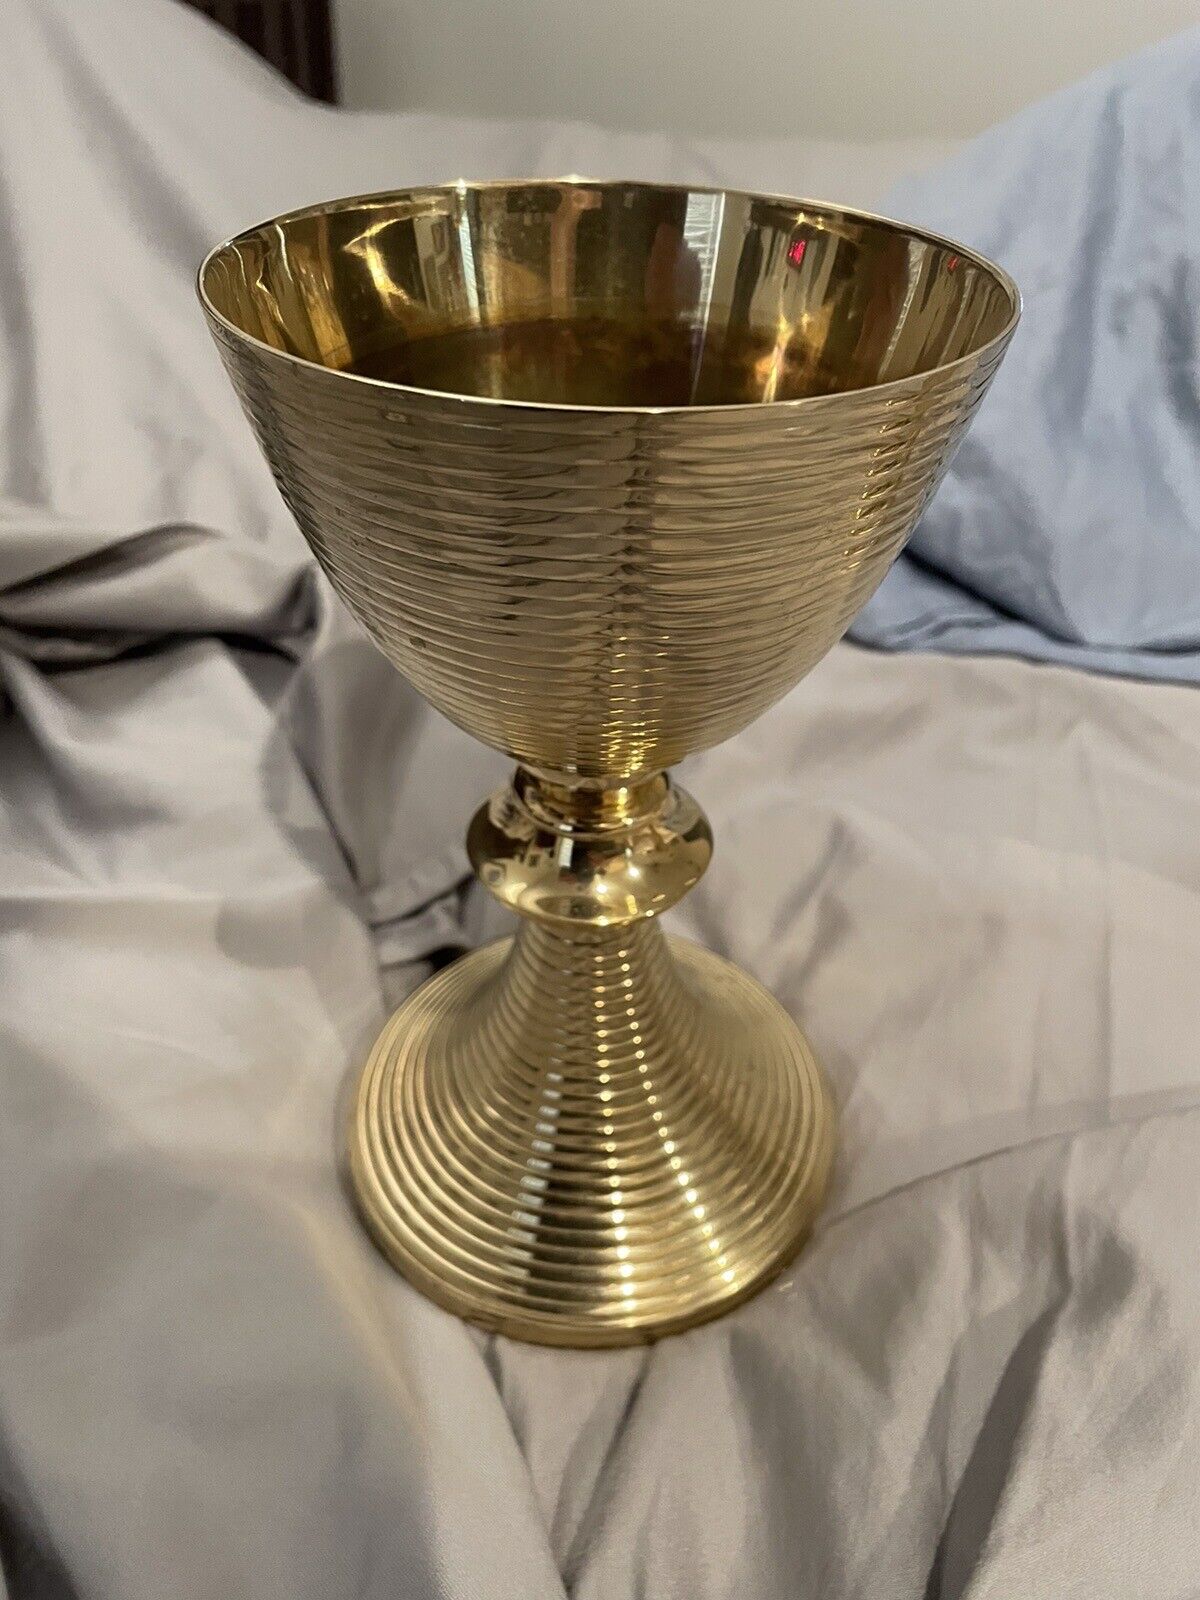 Stratford Chapel Chalice Cup 8 Inches